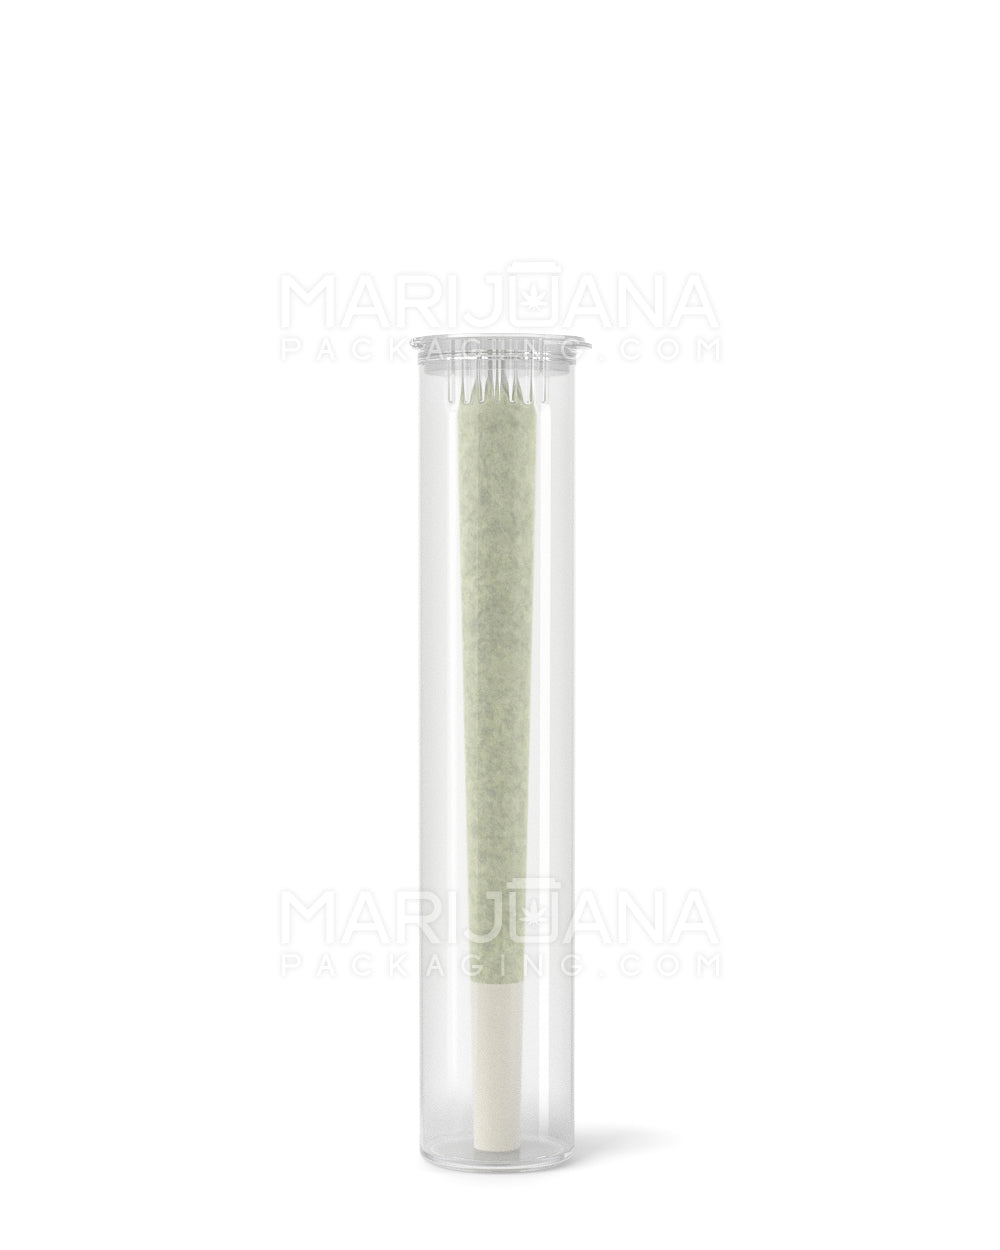 Child Resistant | Pop Top Plastic Pre-Roll Tubes | 98mm - Clear - 1000 Count - 3